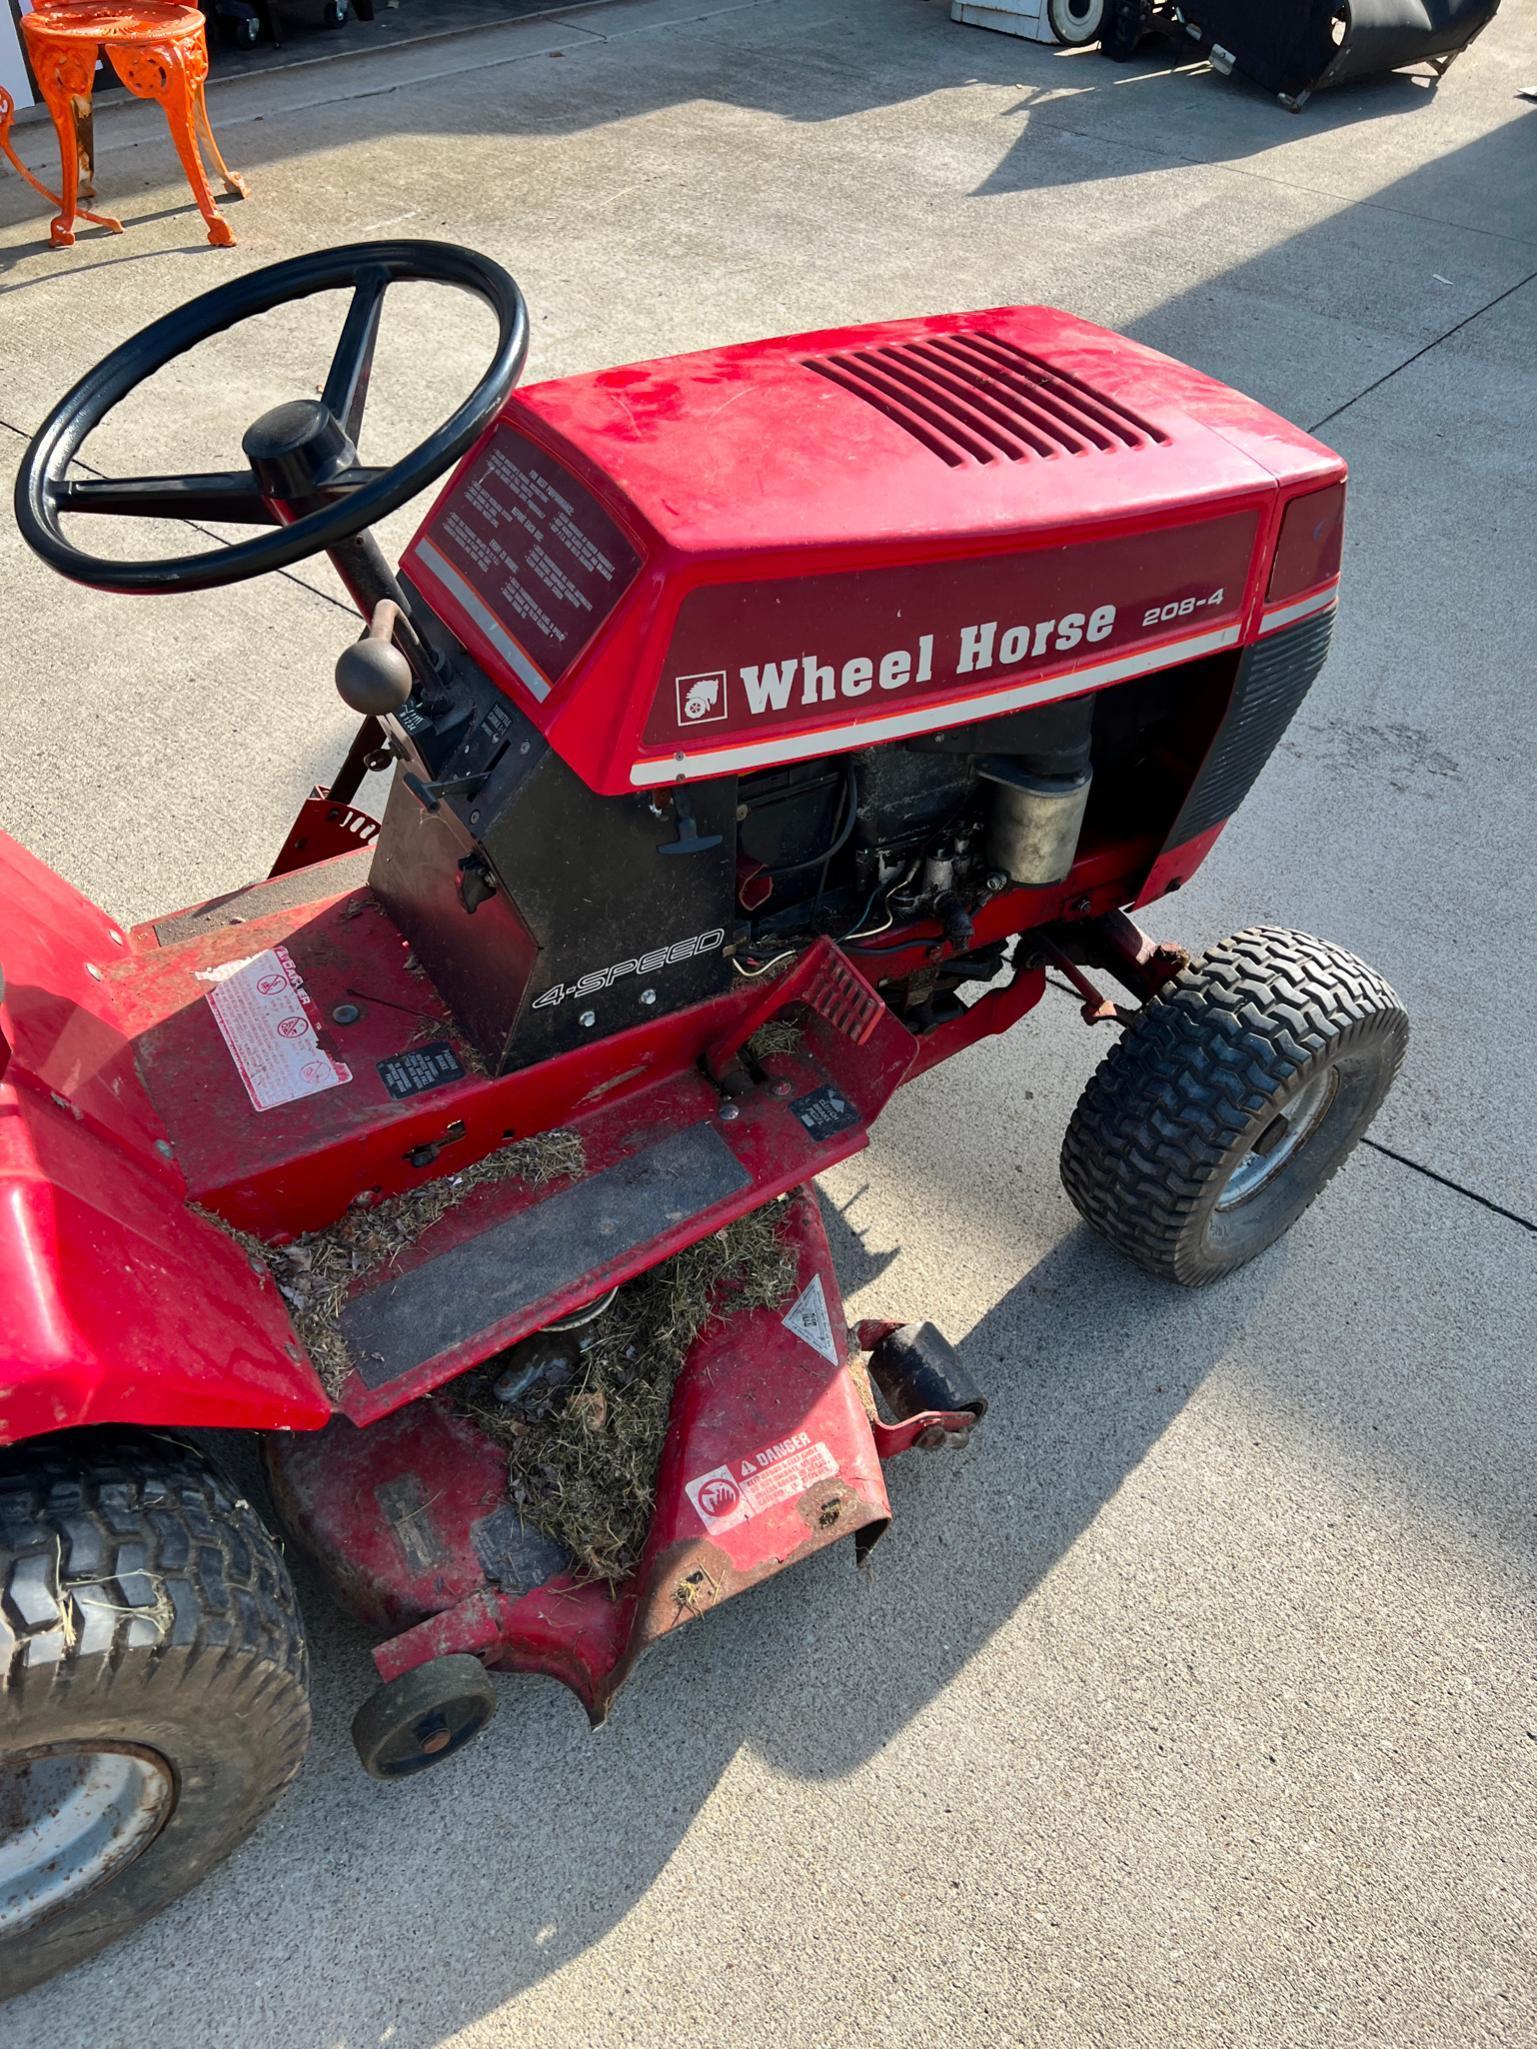 Wheel Horse 208-4 Model No. 3208B402. NEW BATTERY INCLUDED.